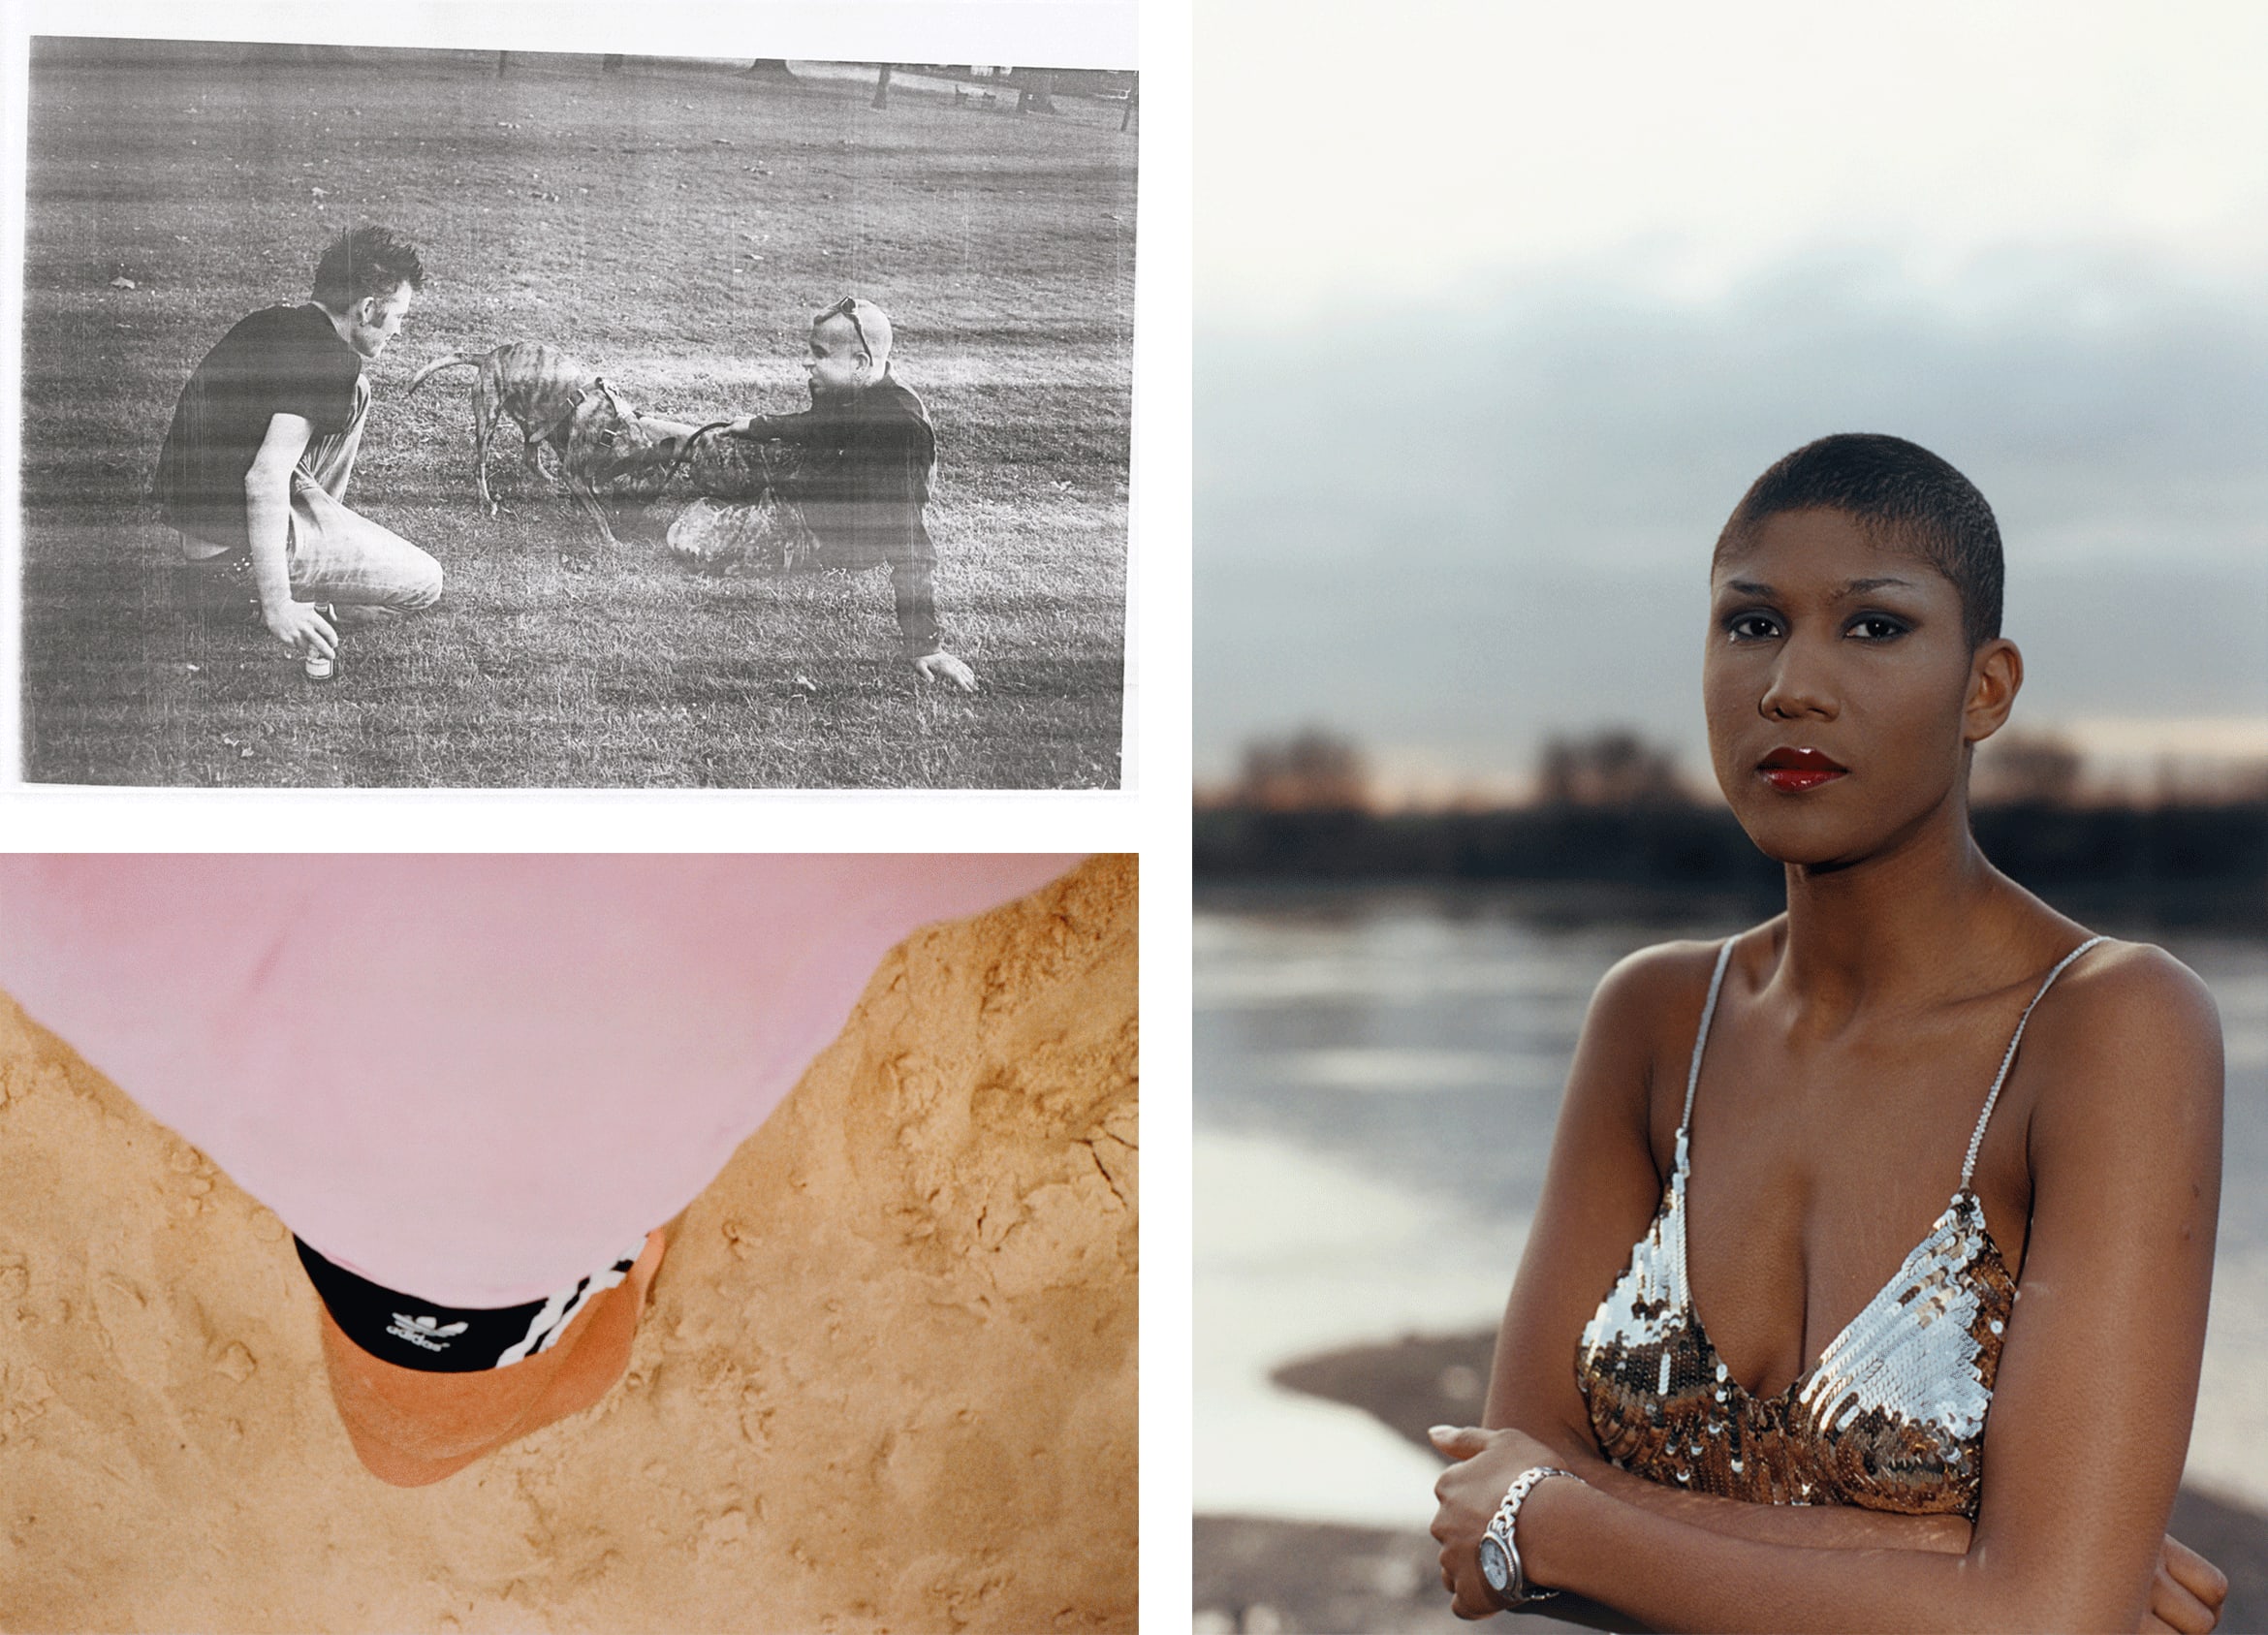 Left to right, all photos by Wolfgang Tillmans, courtesy of the artist and David Zwirner, New York and Hong Kong, Galerie Buchholz, Berlin and Cologne, Maureen Paley, London: 1. Victoria Park (2007). 2. Smokin’ Jo (1995). 3. Lacanau (self) (1986).